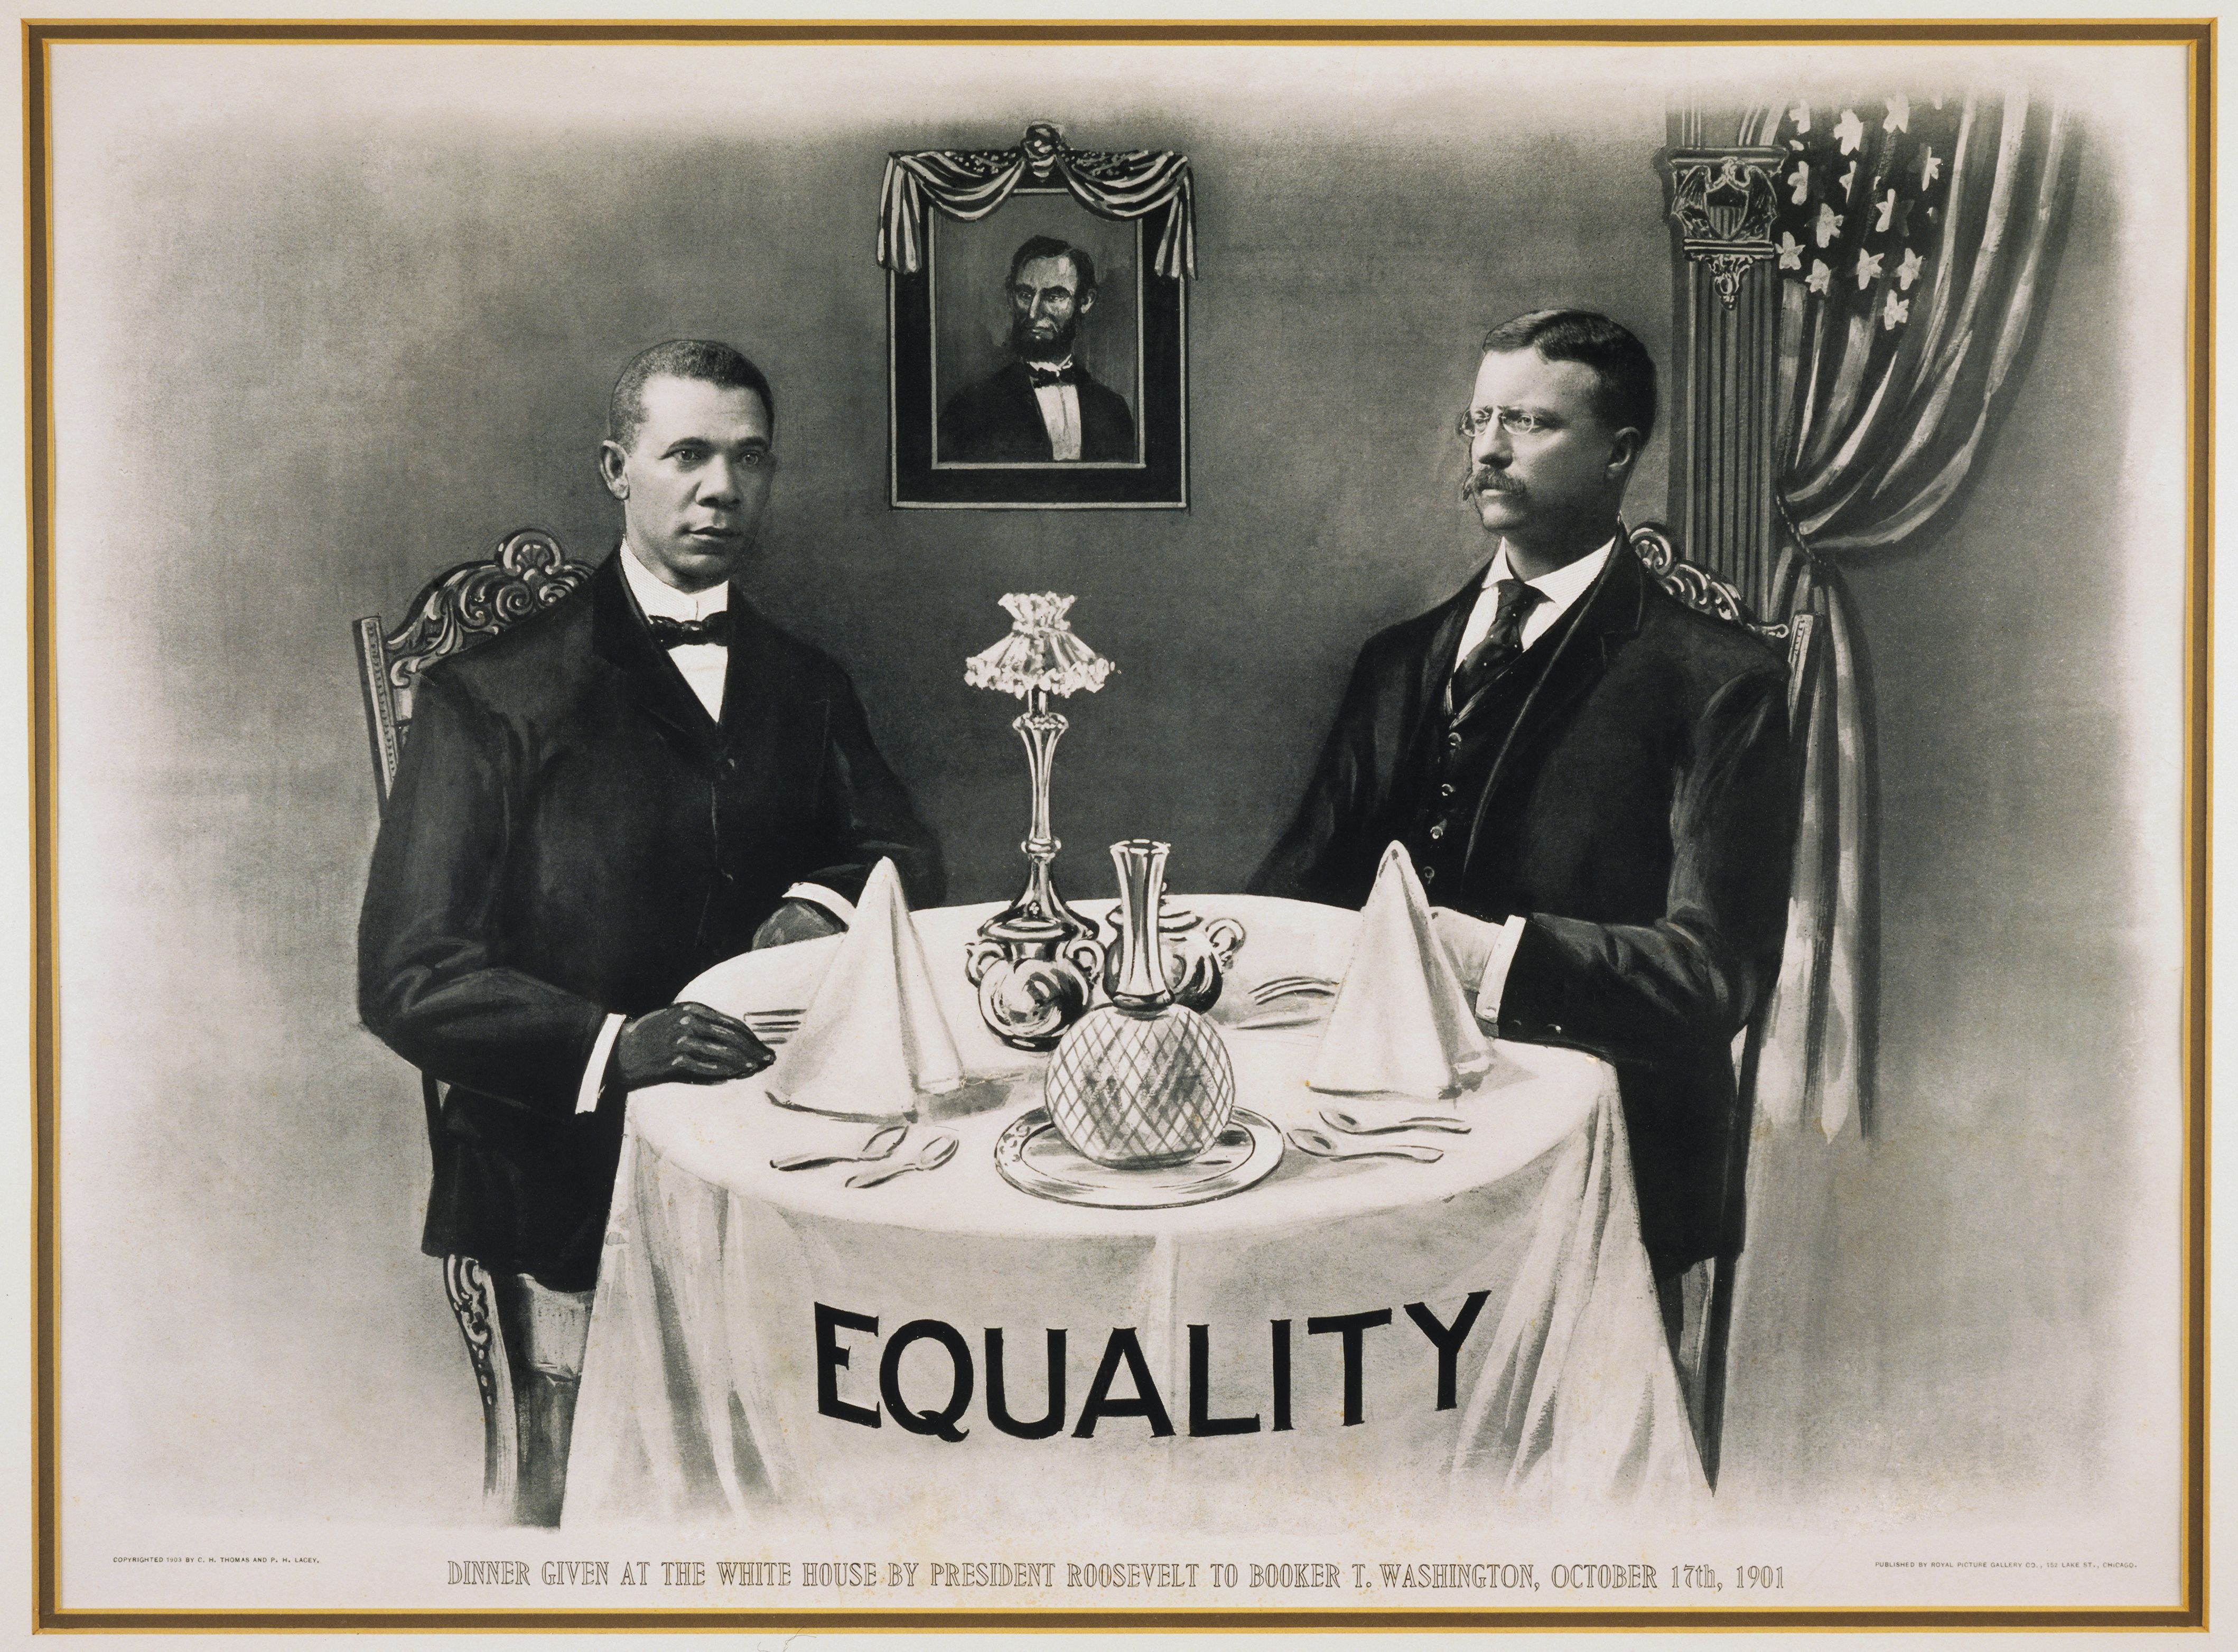 Dinner given at the White House by President Teddy Roosevelt to Booker T. Washington, October 17th, 1901.